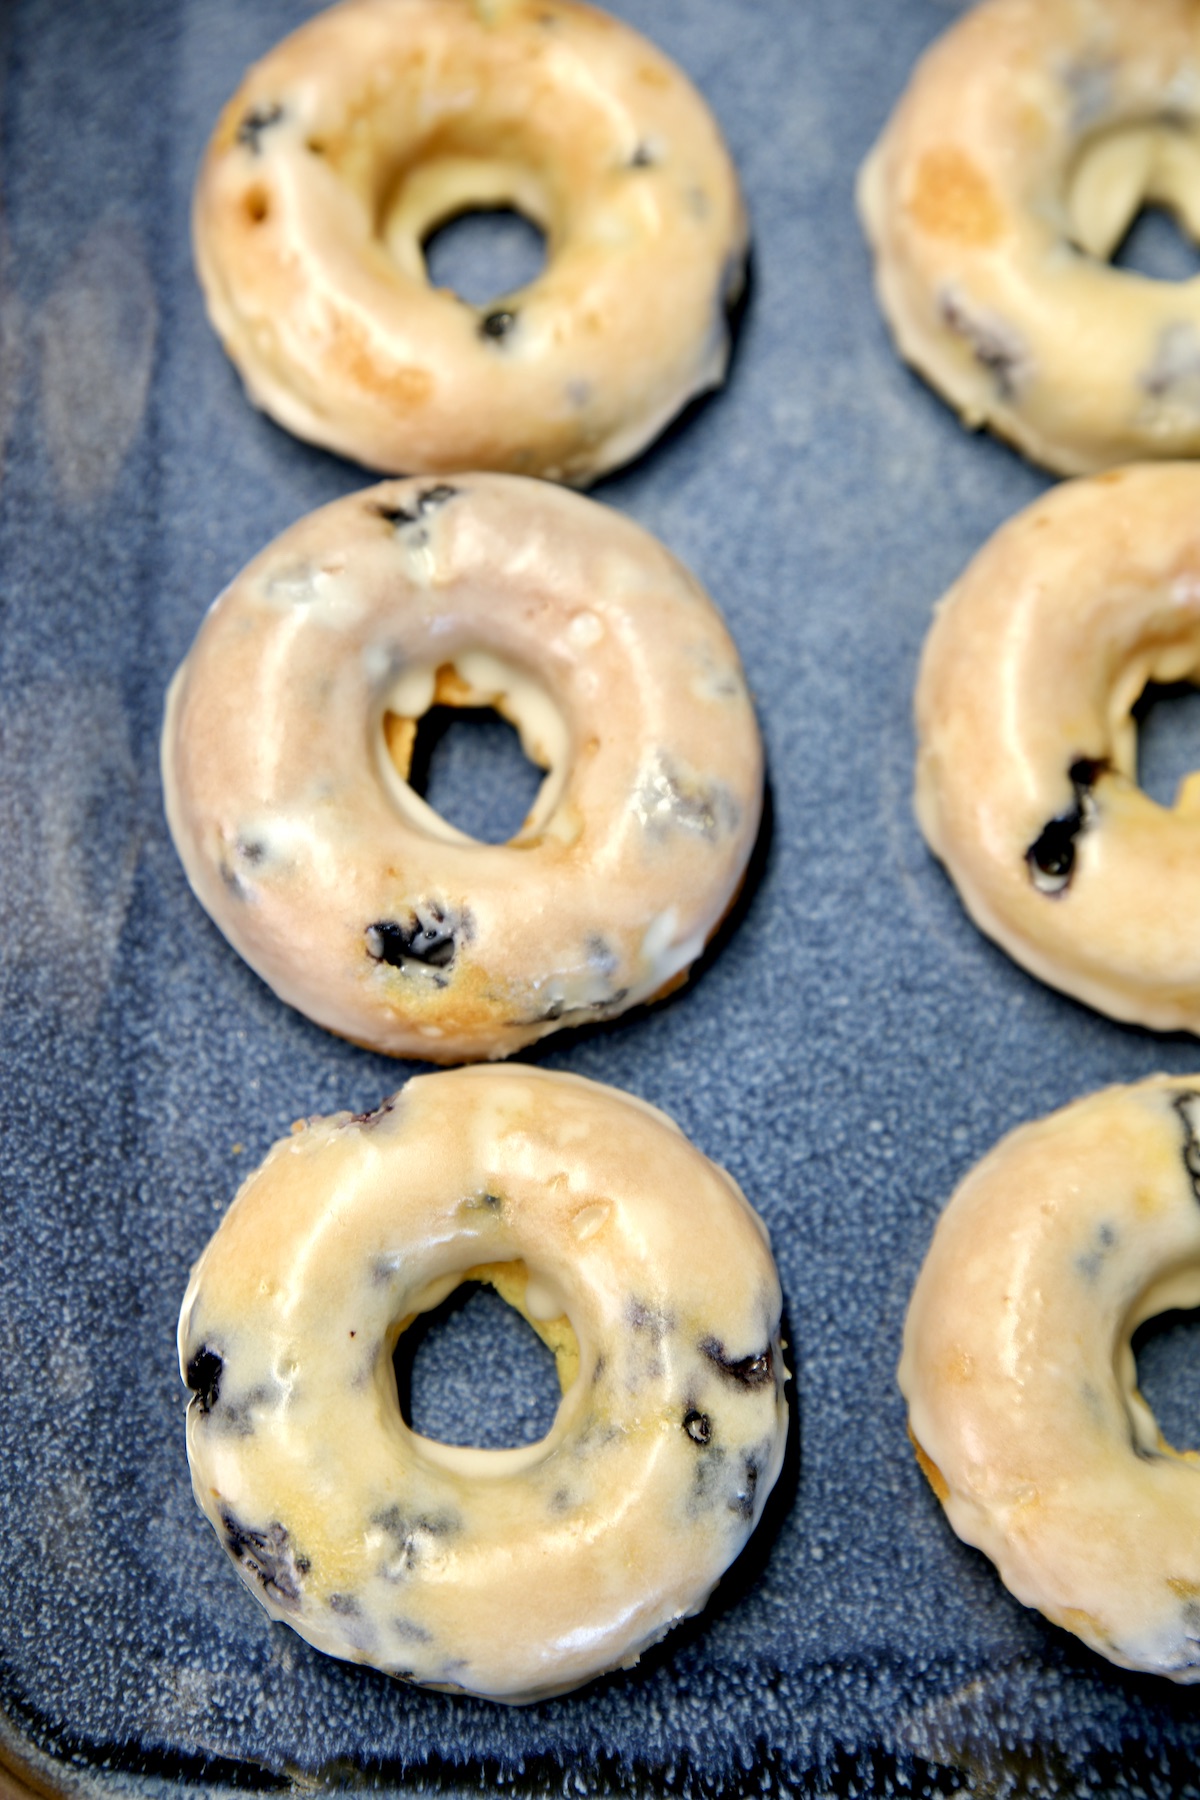 Platter of blueberry donuts.